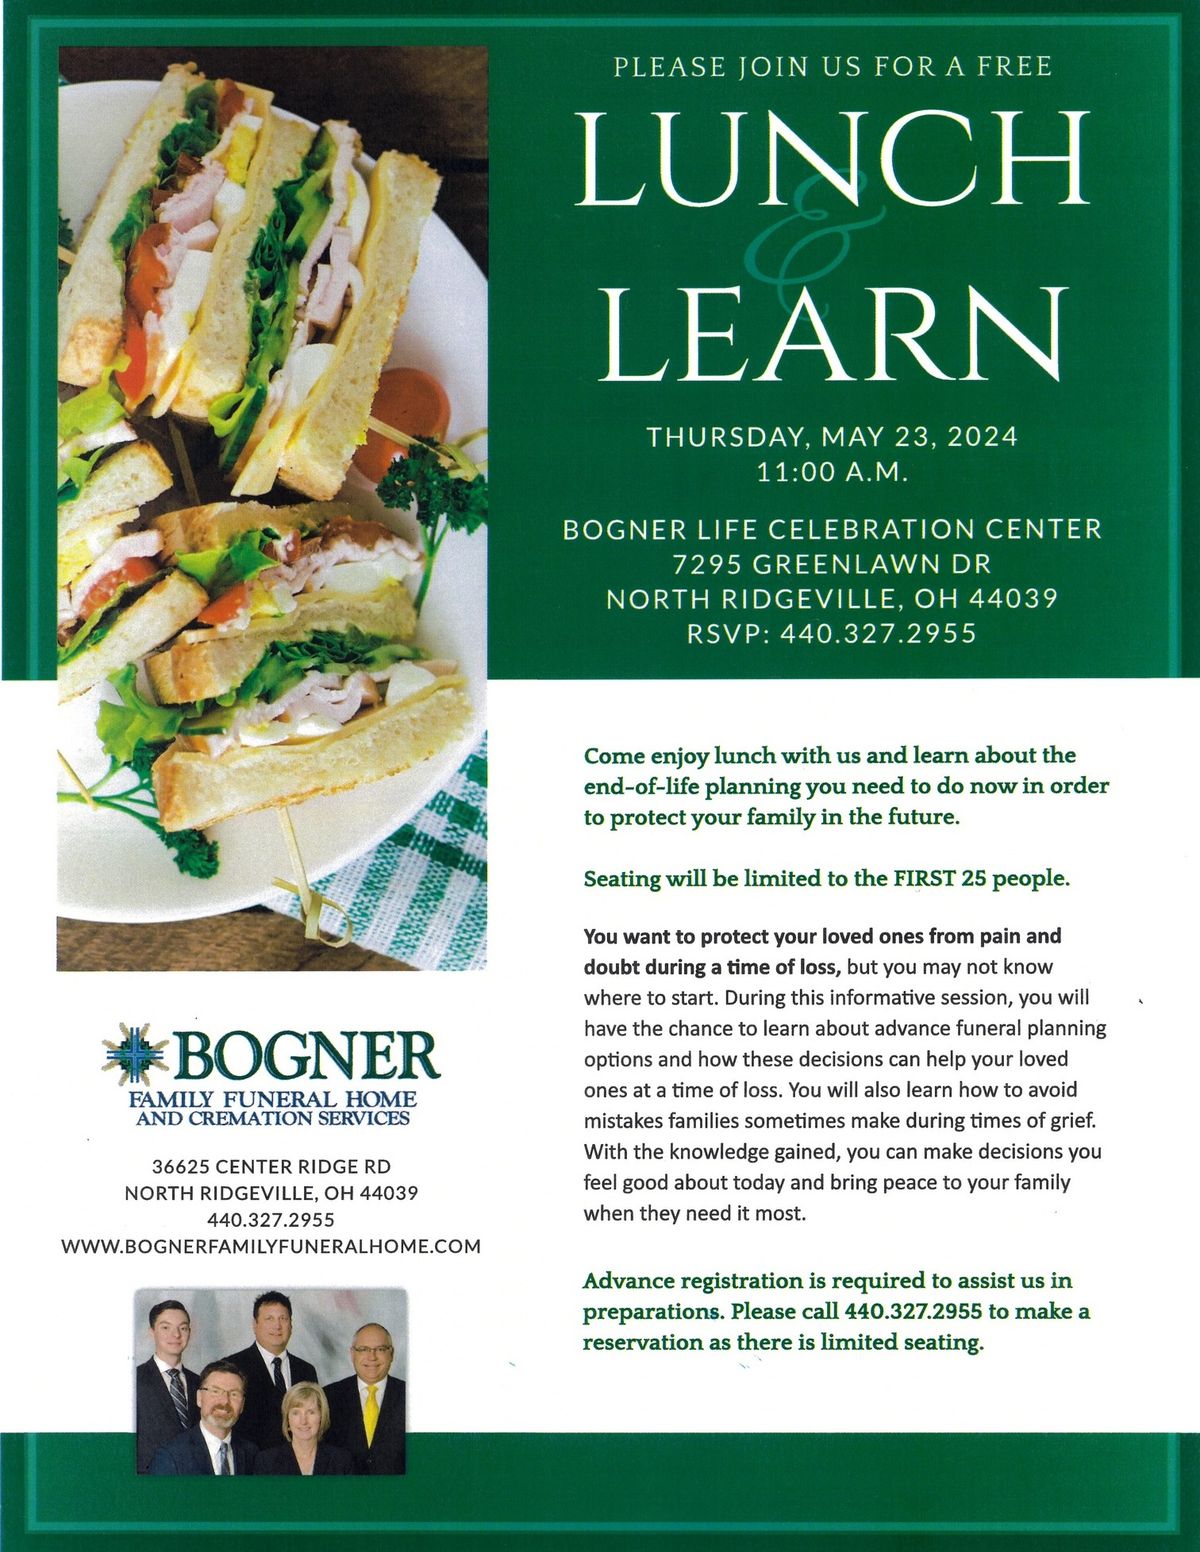 Free Lunch and Learn